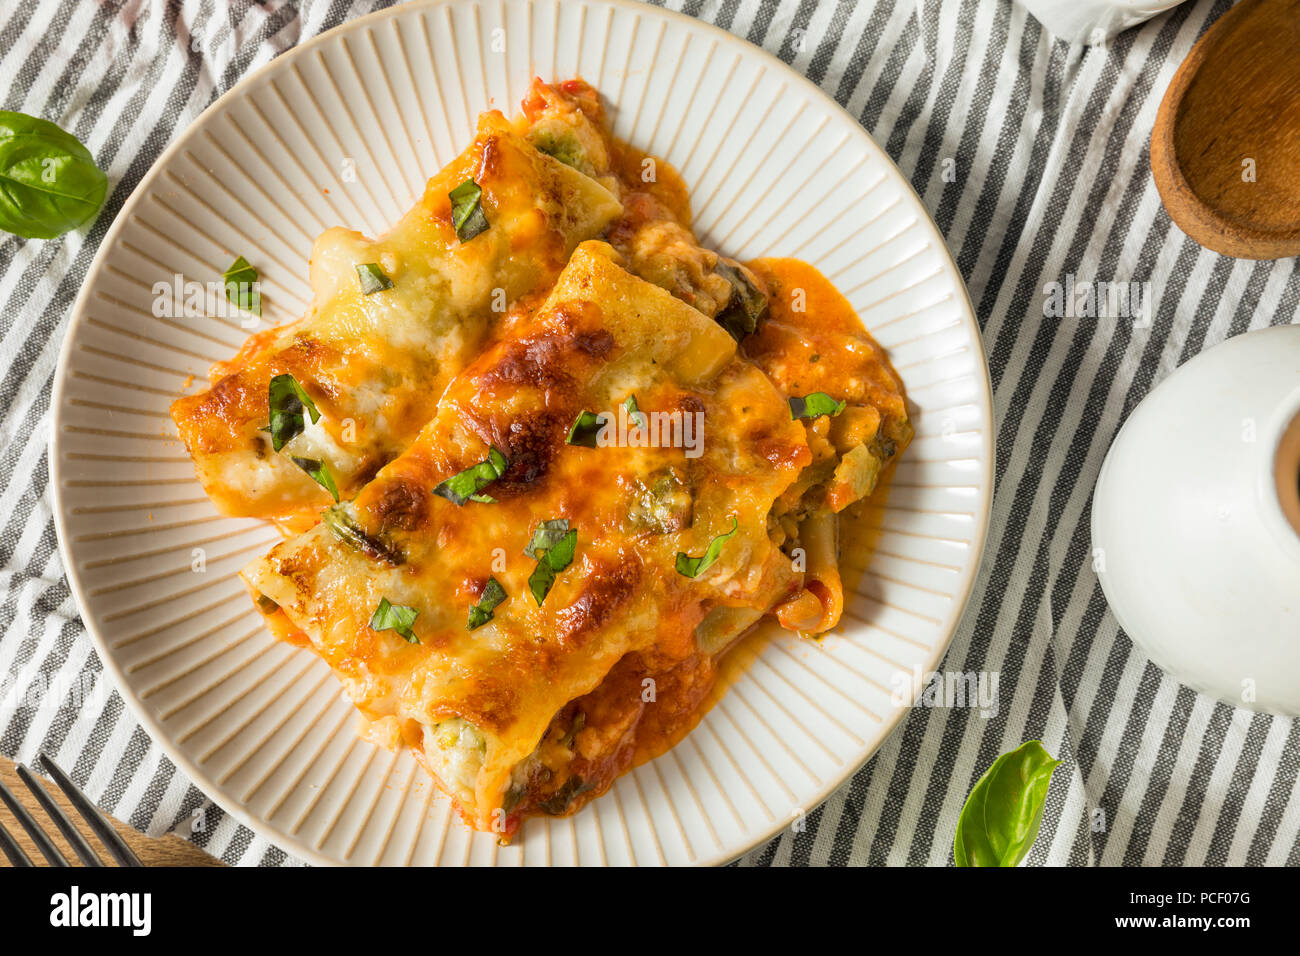 Baked Stuffed Vegetarian Cannelloni with Broccoli Basil and Cheese ...